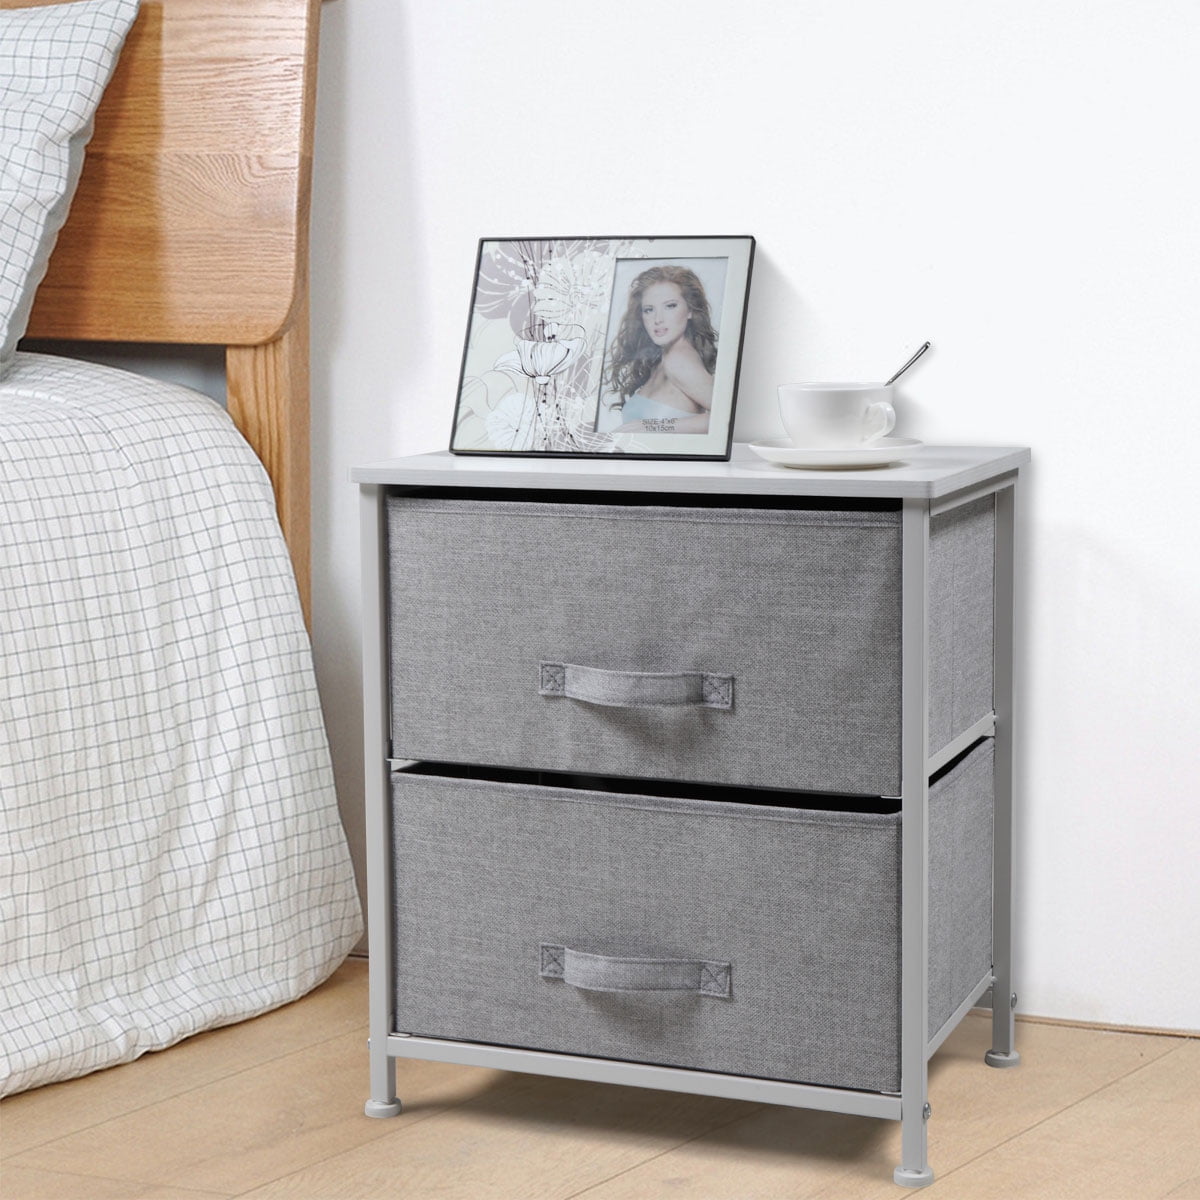 Living Room Kids Room Dorm Room Storage Wardrobe Cabinet with 4 Grey Fabric Drawers and Metal Frame Dresser Storage Drawer Unit with Adjustable Feet Chest of Drawers for Closet Bedroom Hallway 